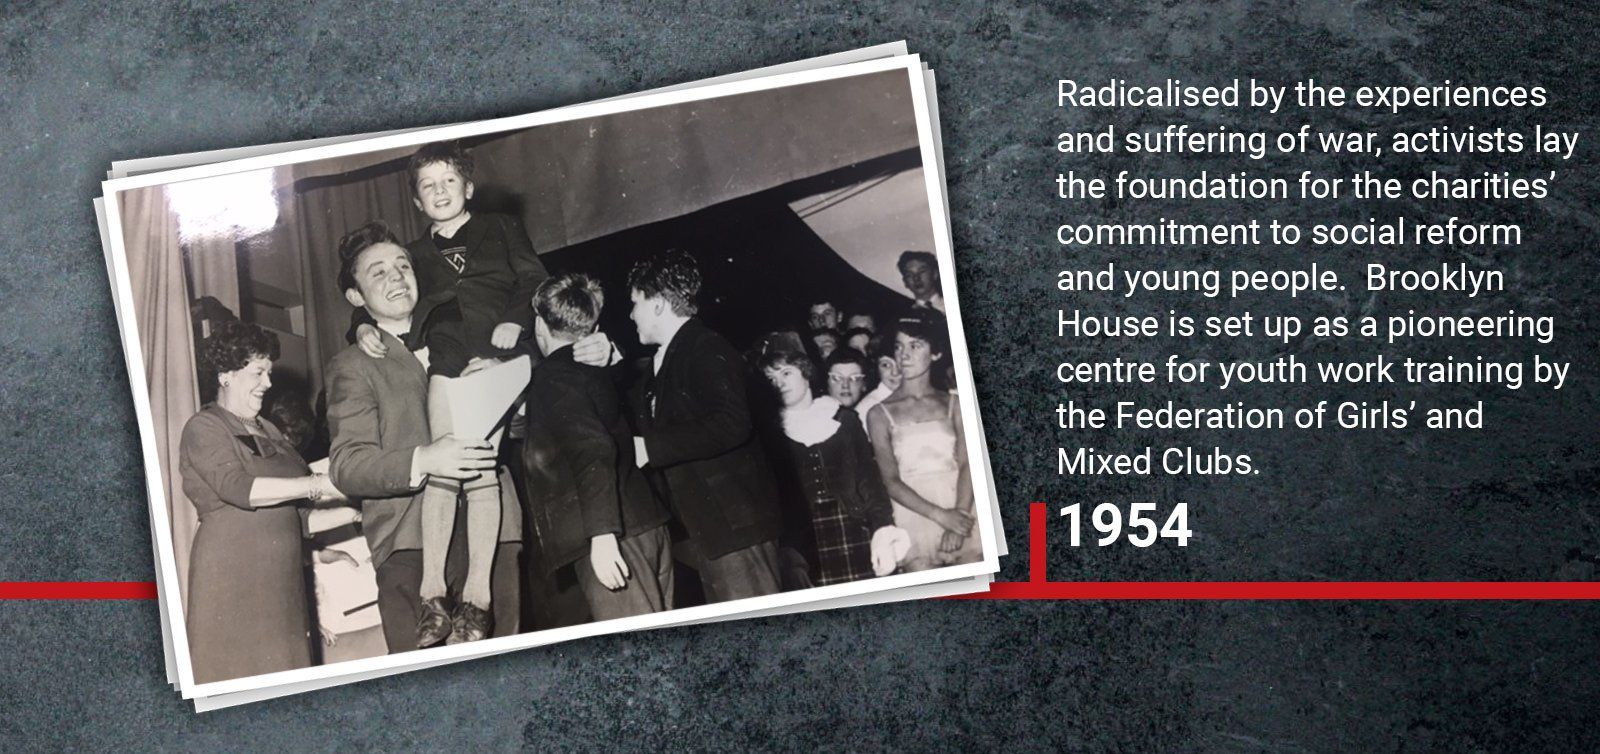 1954 Radicalised by the experiences and suffering of war, activists lay the foundation for the charities’ commitment to social reform and young people.  Brooklyn House is set up as a pioneering centre for youth work training by the Federation of Girls’ and Mixed Clubs.